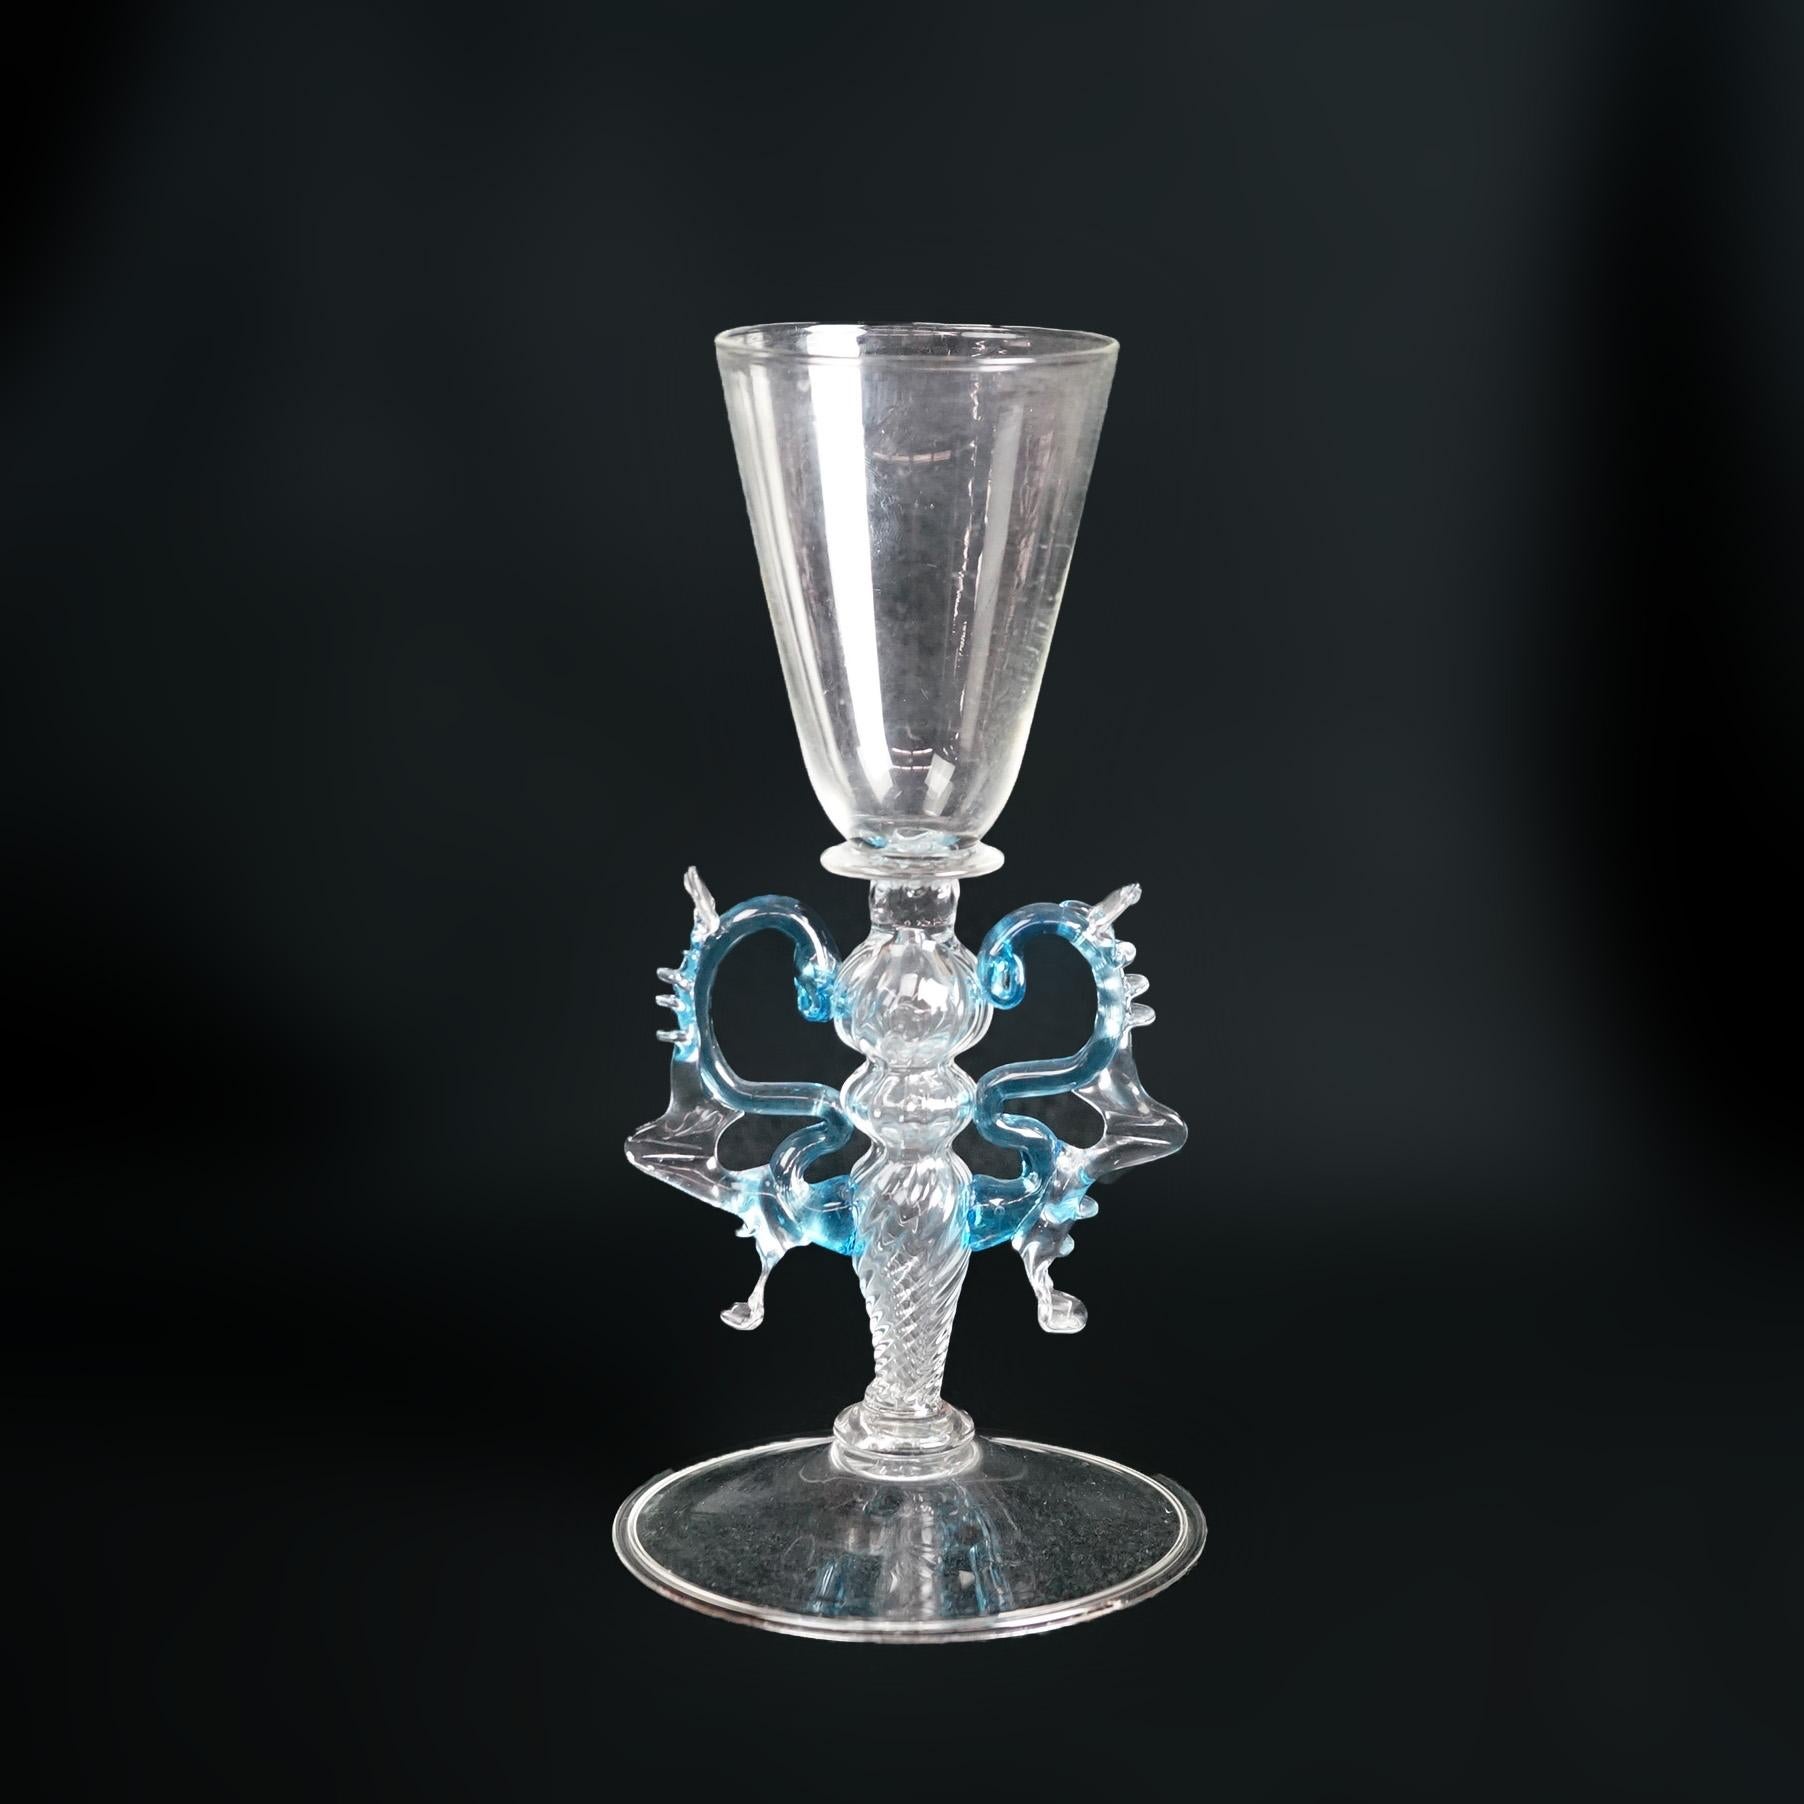 An antique figural Venetian style goblet by William Gudenrath offers art glass construction with flared cup over double stylized dragon pedestal, artist signed on base, c1920

Measures - 7